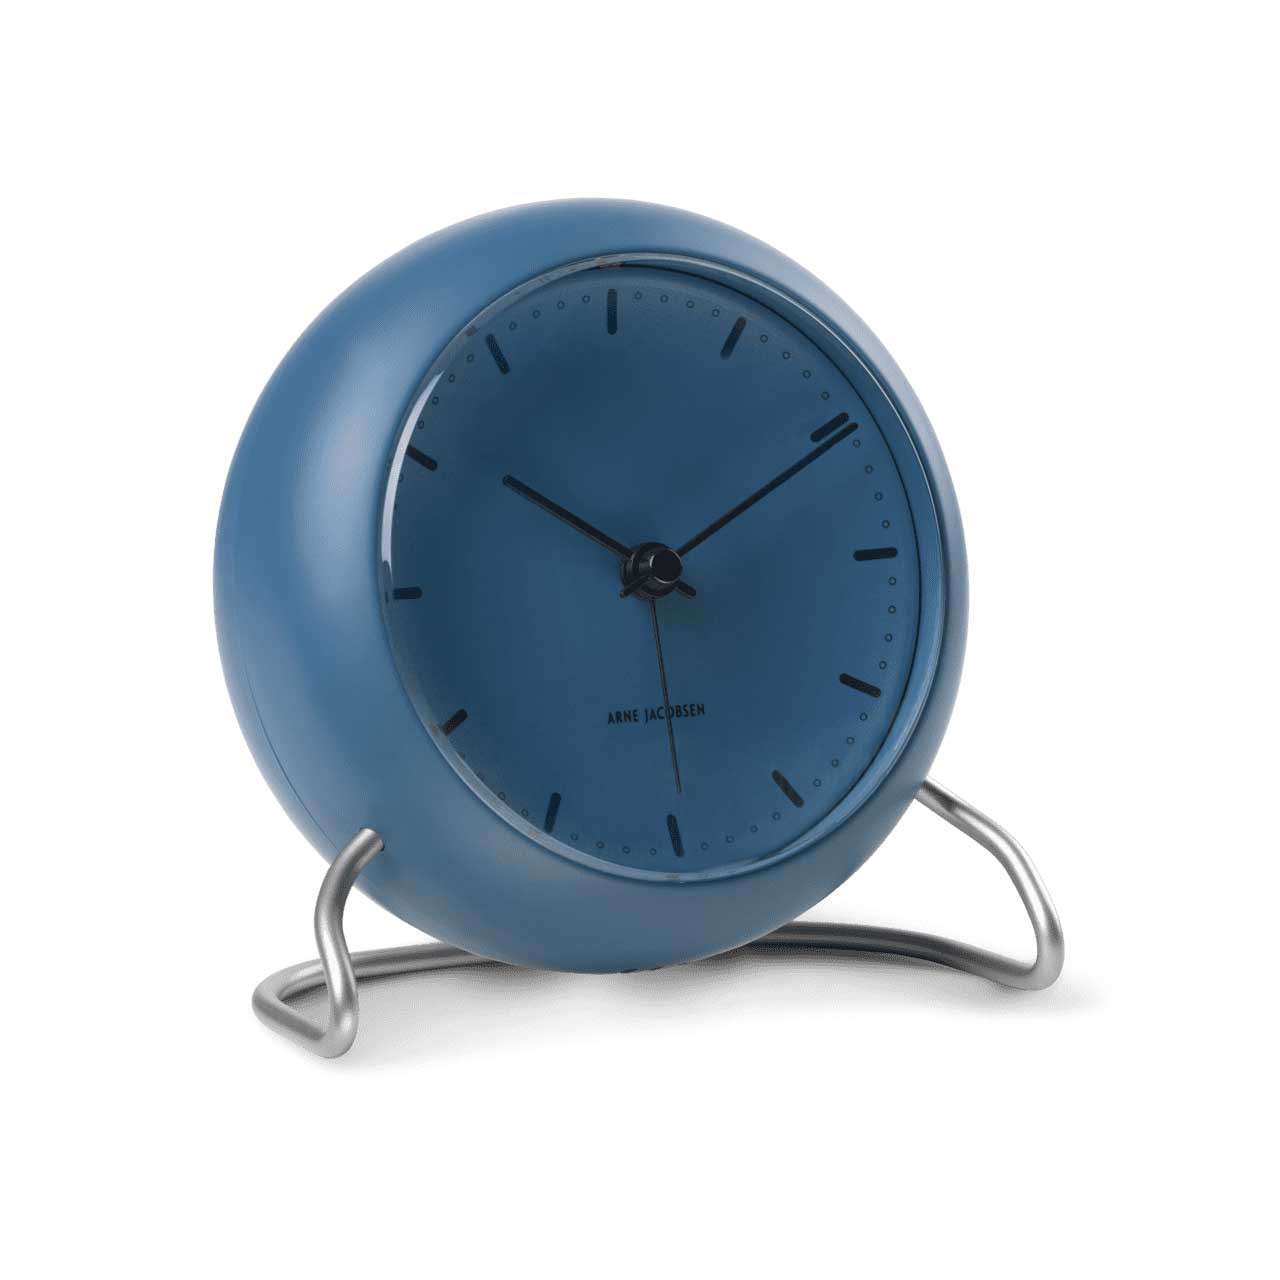 Arne Jacobsen City Hall table clock with alarm in stone-blue | the design gift shop